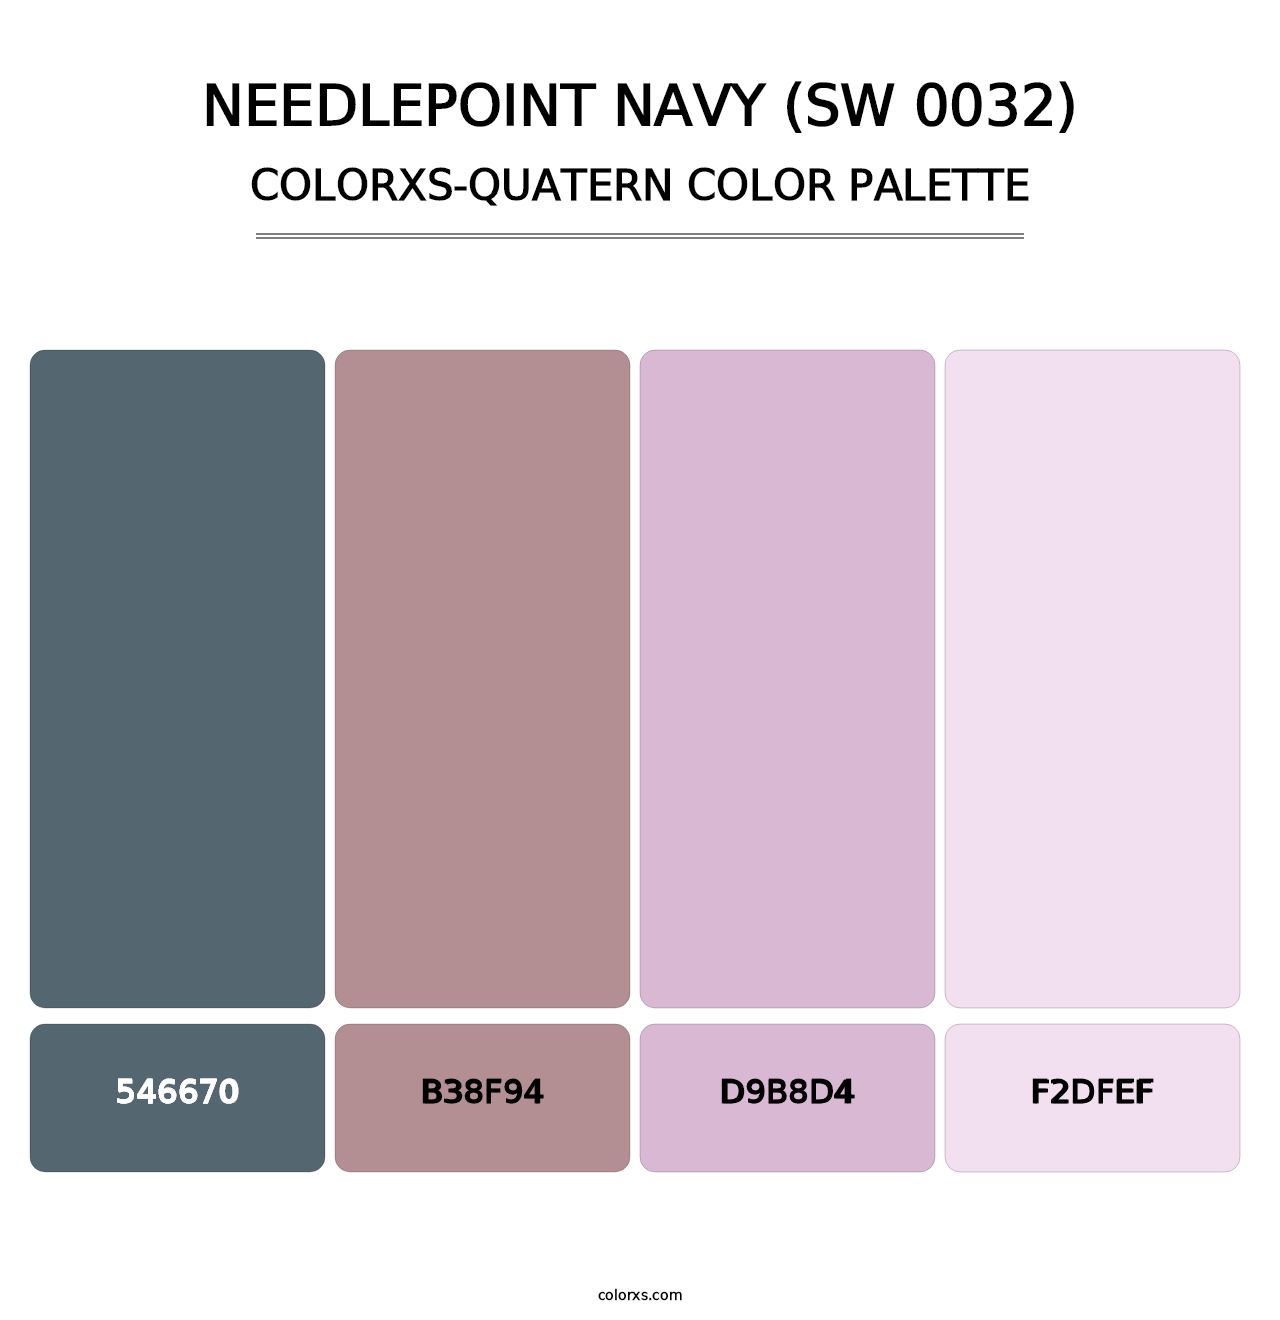 Needlepoint Navy (SW 0032) - Colorxs Quatern Palette